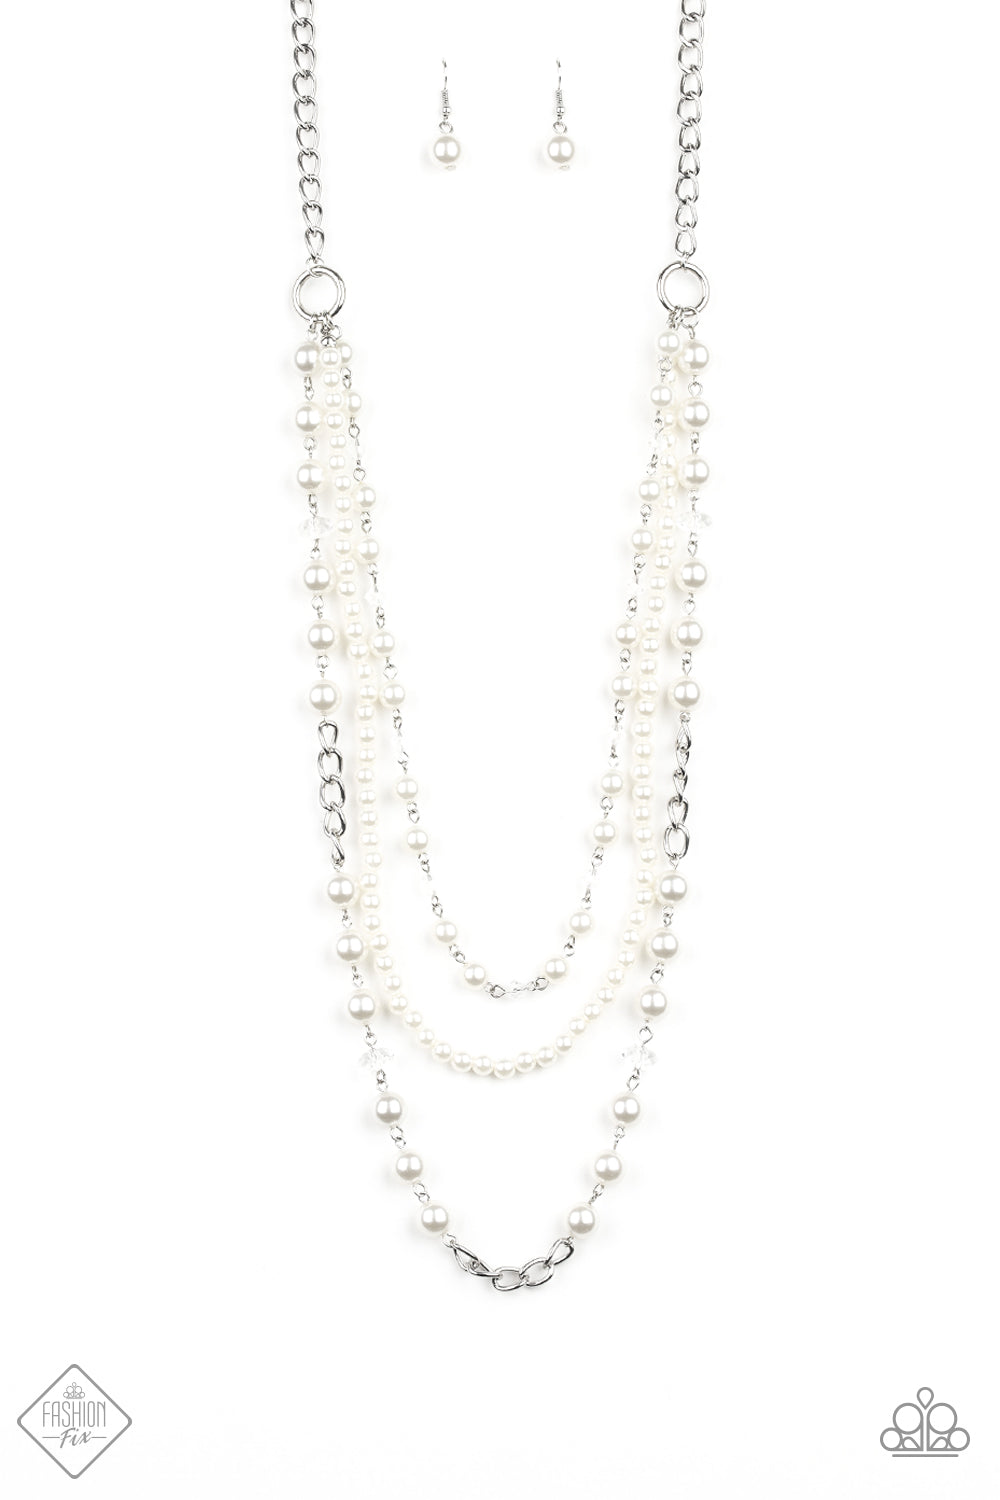 New York City Chic - White pearl necklace